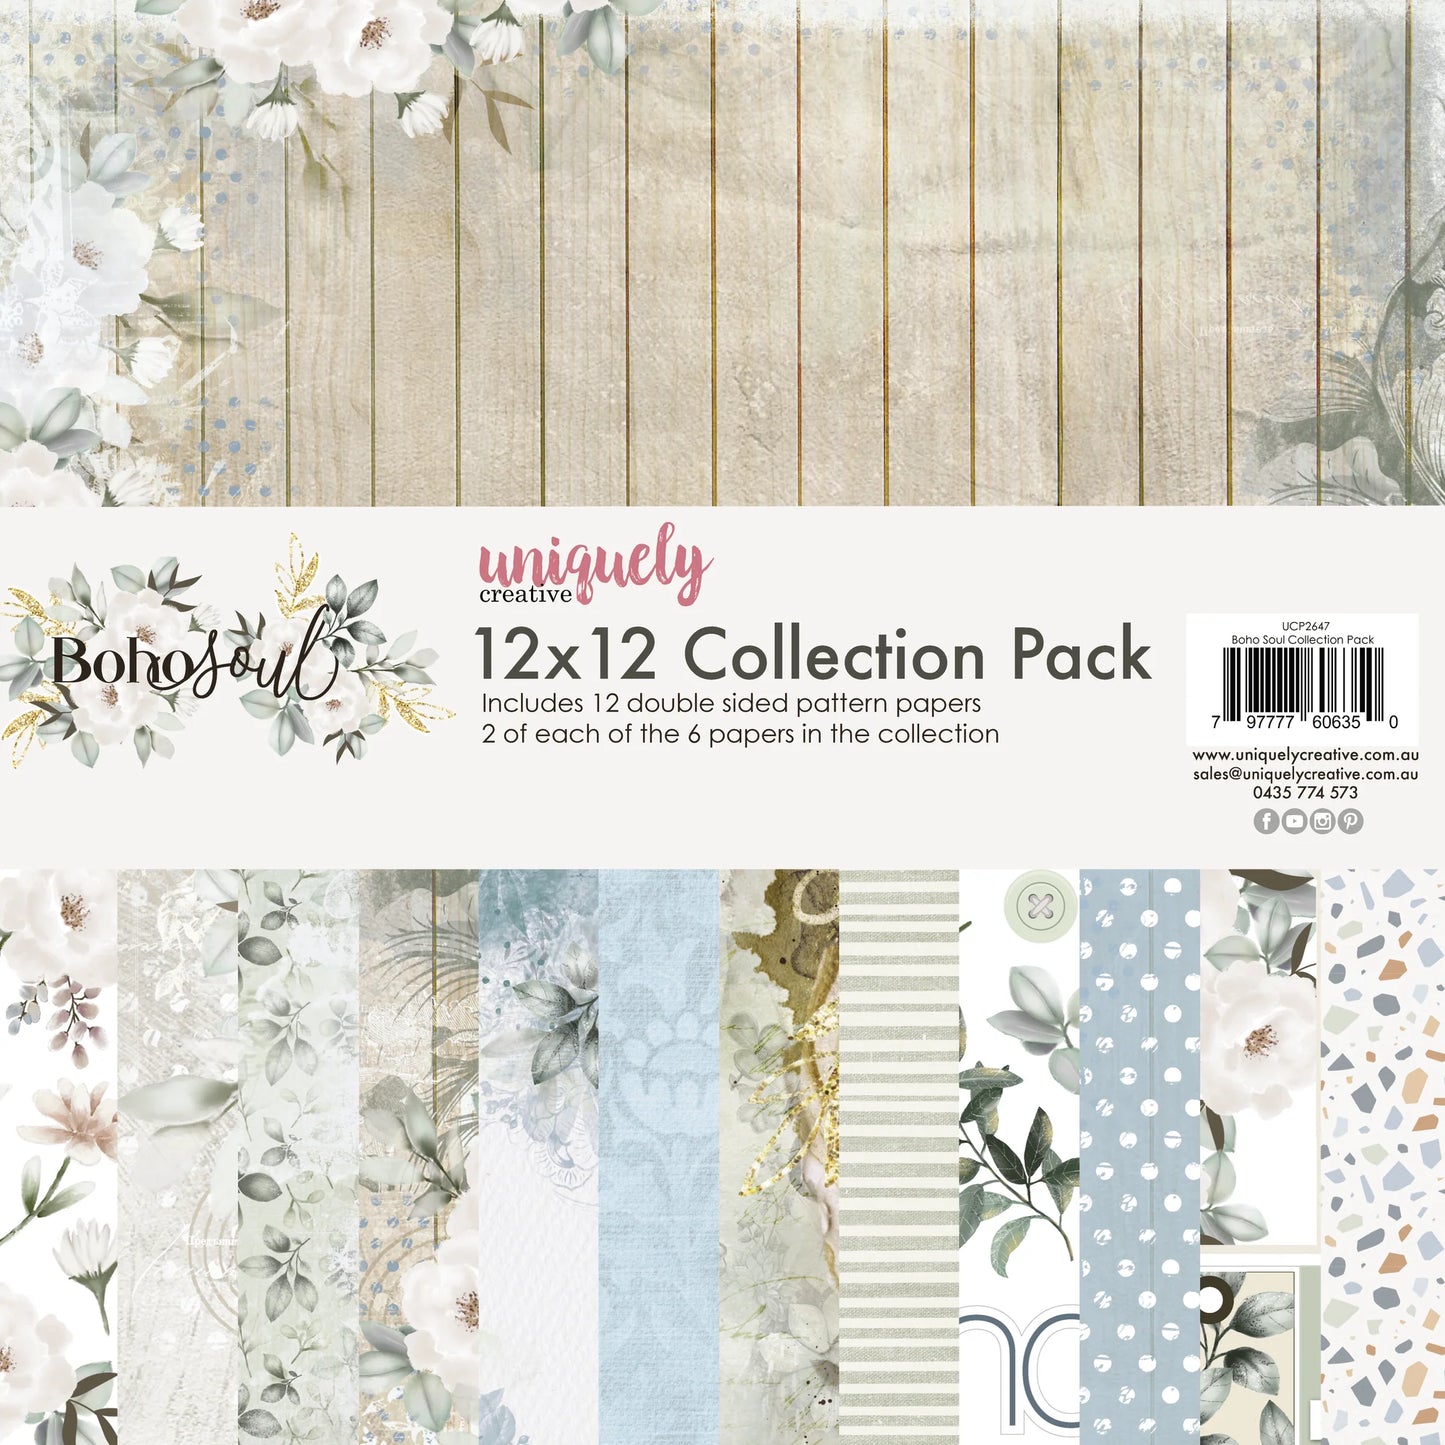 Uniquely Creative 12x12 Double Sided Paper Pack - Boho Soul.